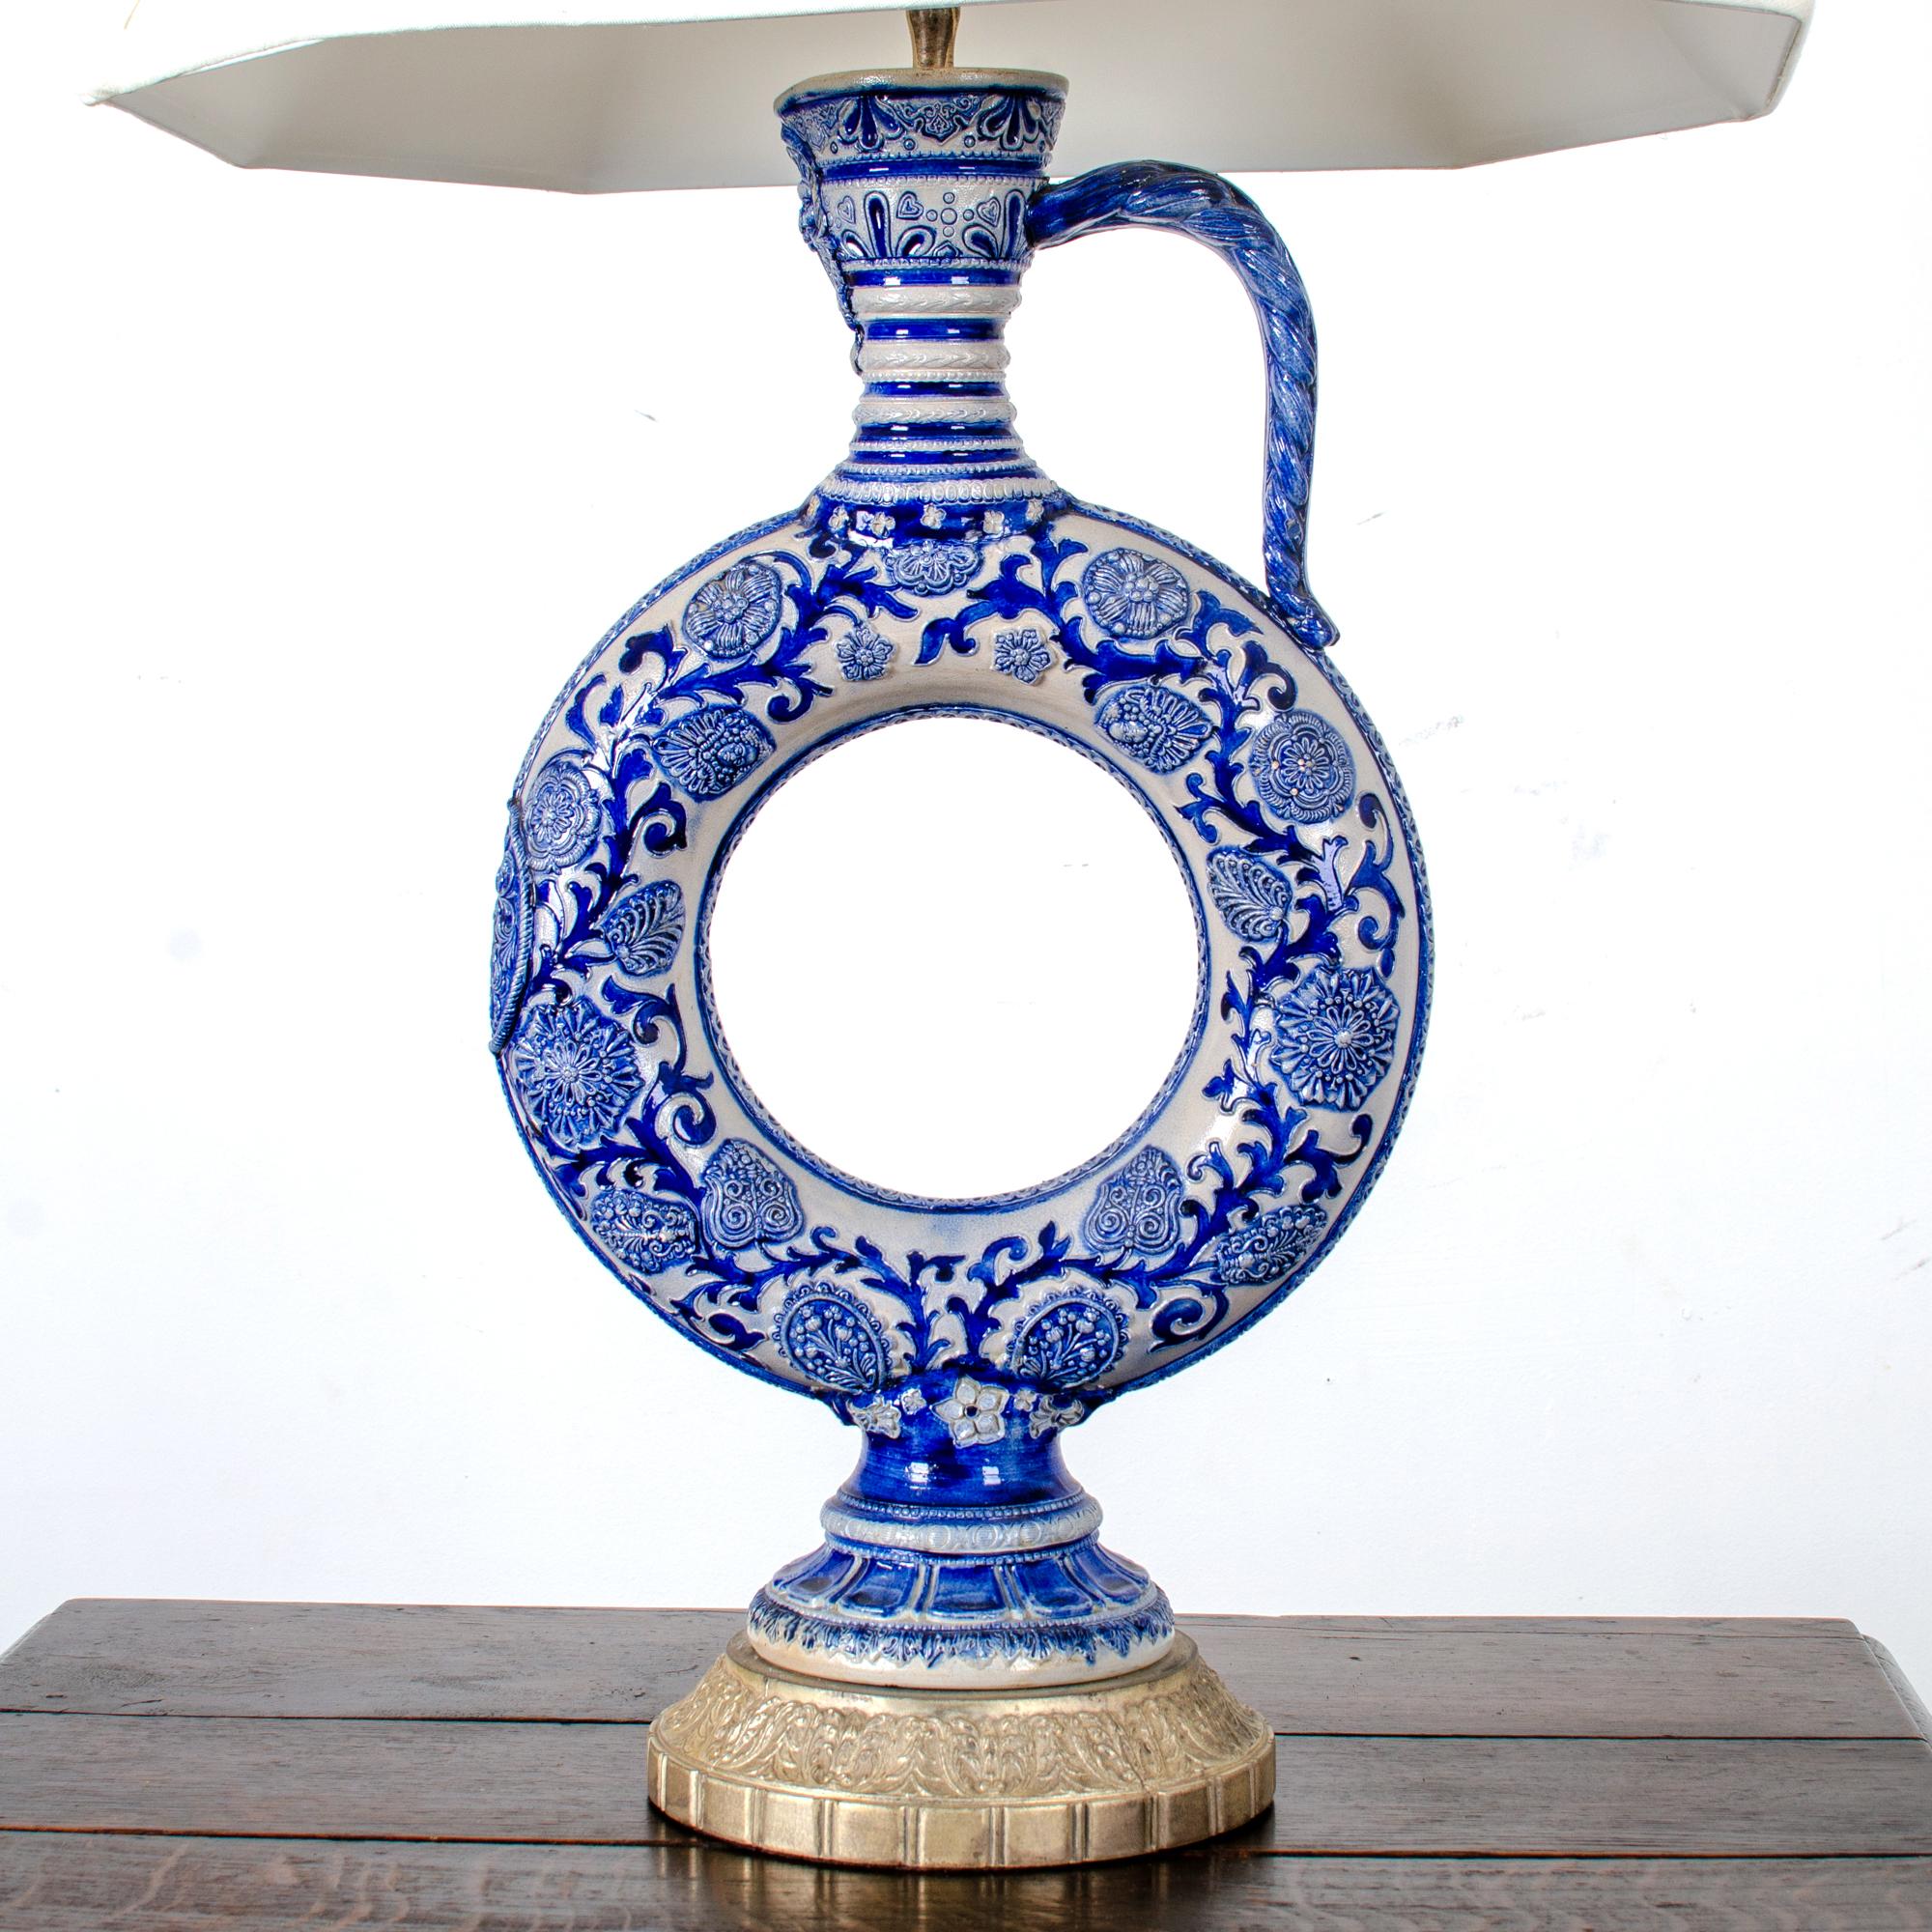 A late 19th or early 20th century Westerwald ring jug converted to a lamp.  Bellarmine face on tapering neck, with rope-twist handle, molded flowering vines and armorial roundel, with reeded foot.  Blue under salt glaze.

Jug measures 11 inches wide